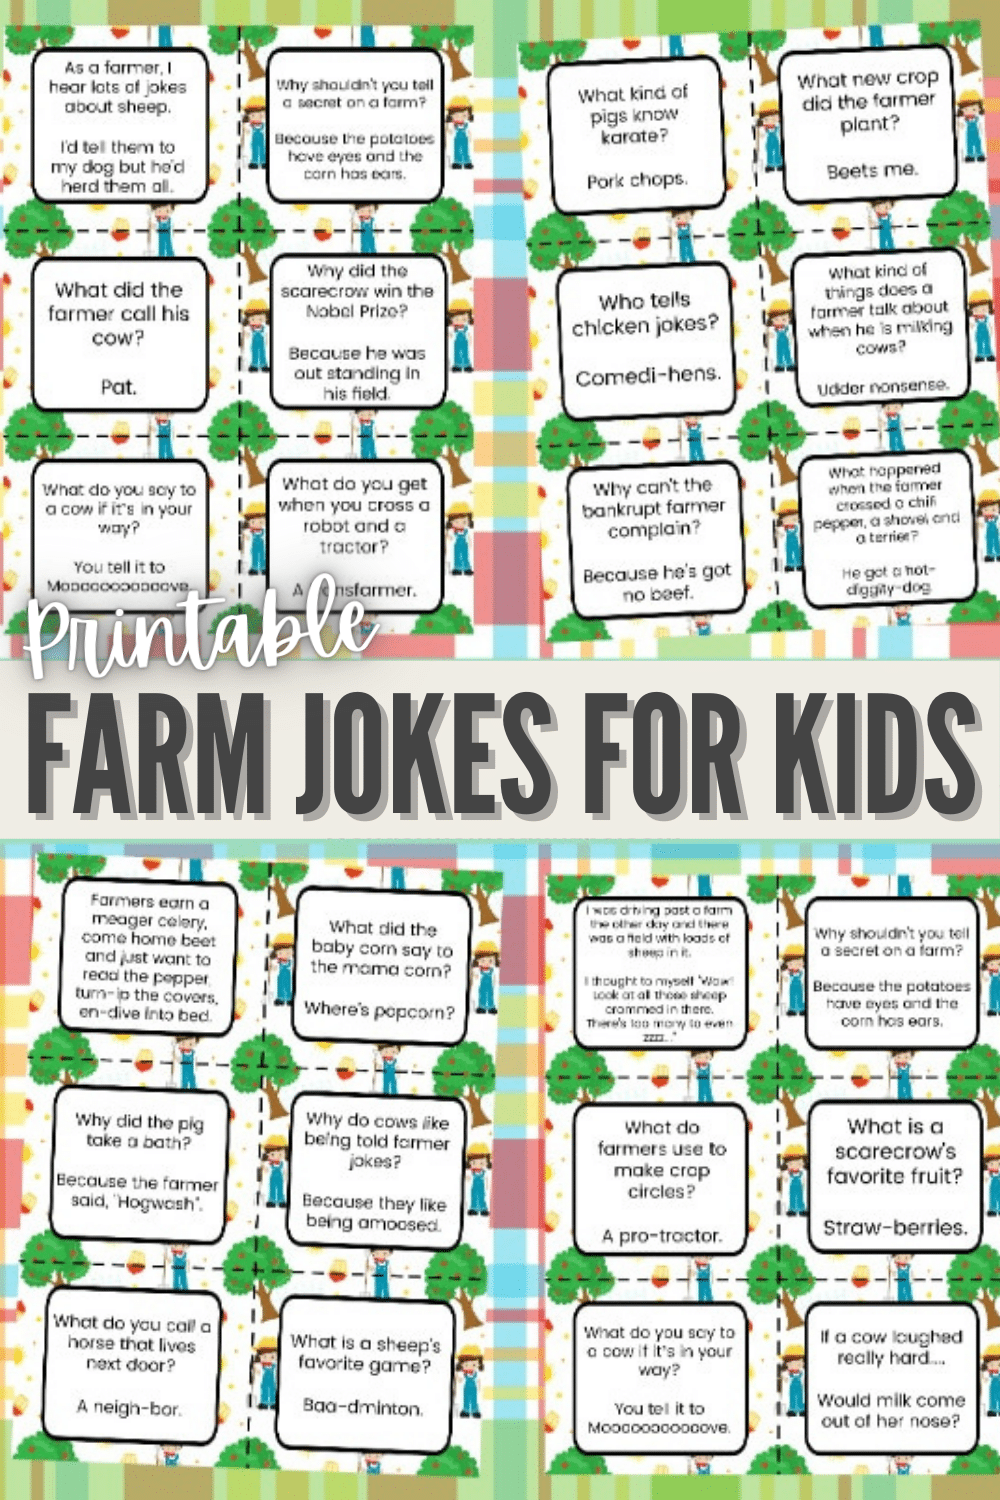 Printable farm jokes for kids are hilarious and perfect to put in school lunches or for your child to use for an at-home stand up comedy routine. #printables #jokesforkids #farming via @wondermomwannab